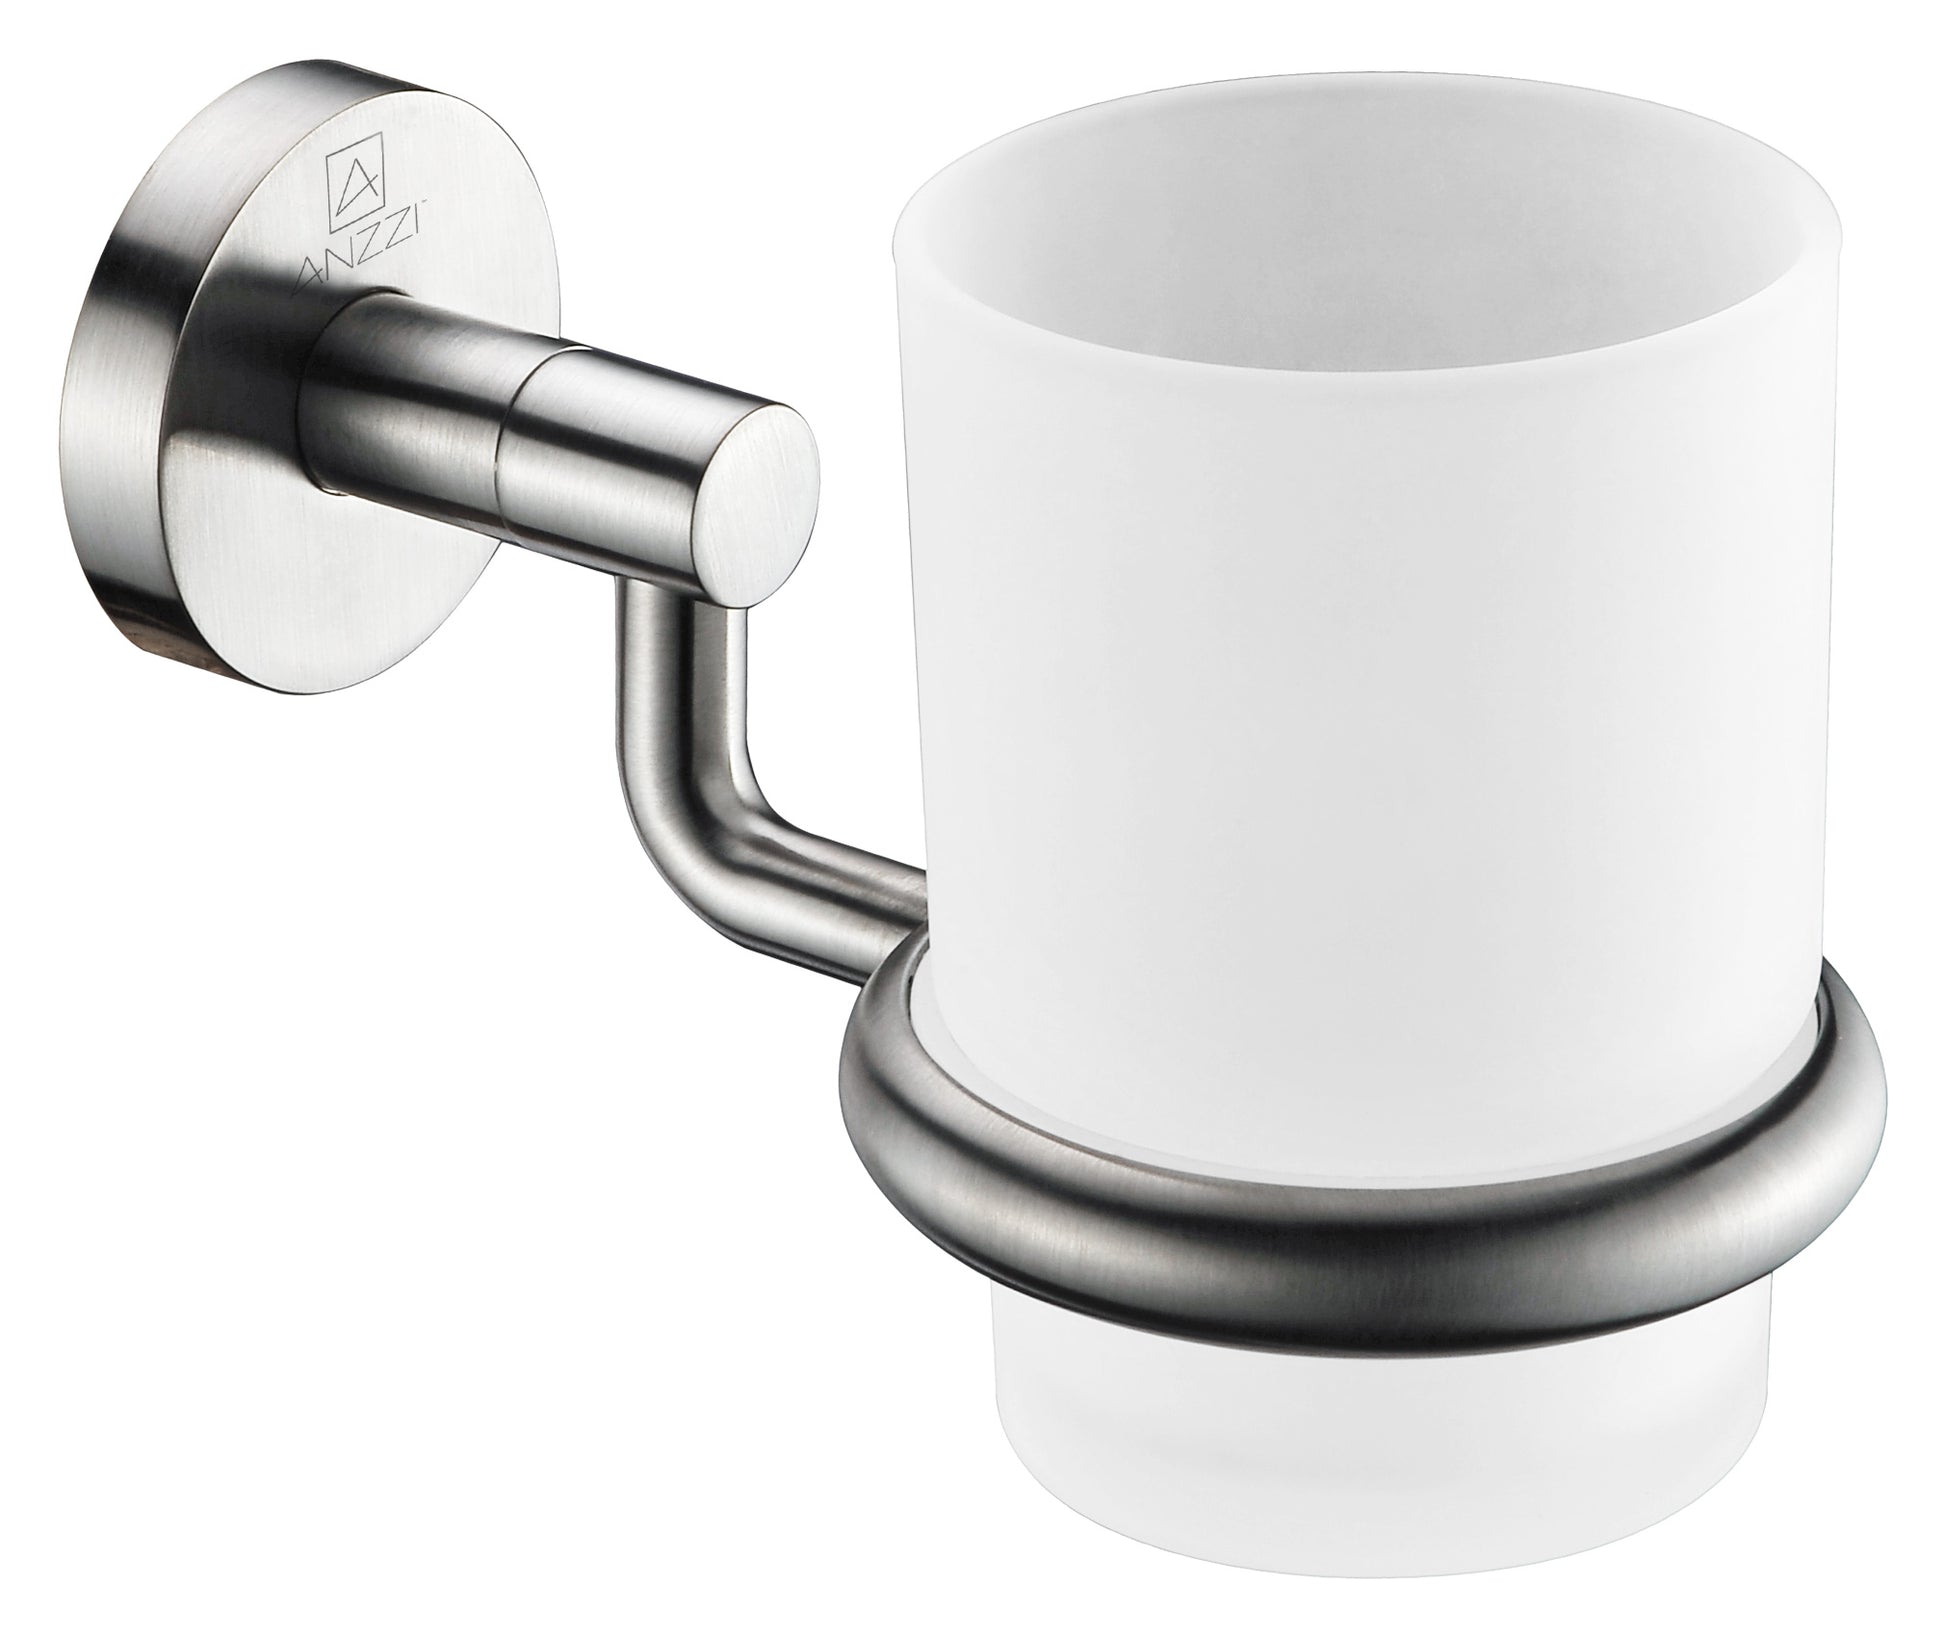 AC-AZ001BN - Caster Series 7 in. Toothbrush Holder in Brushed Nickel